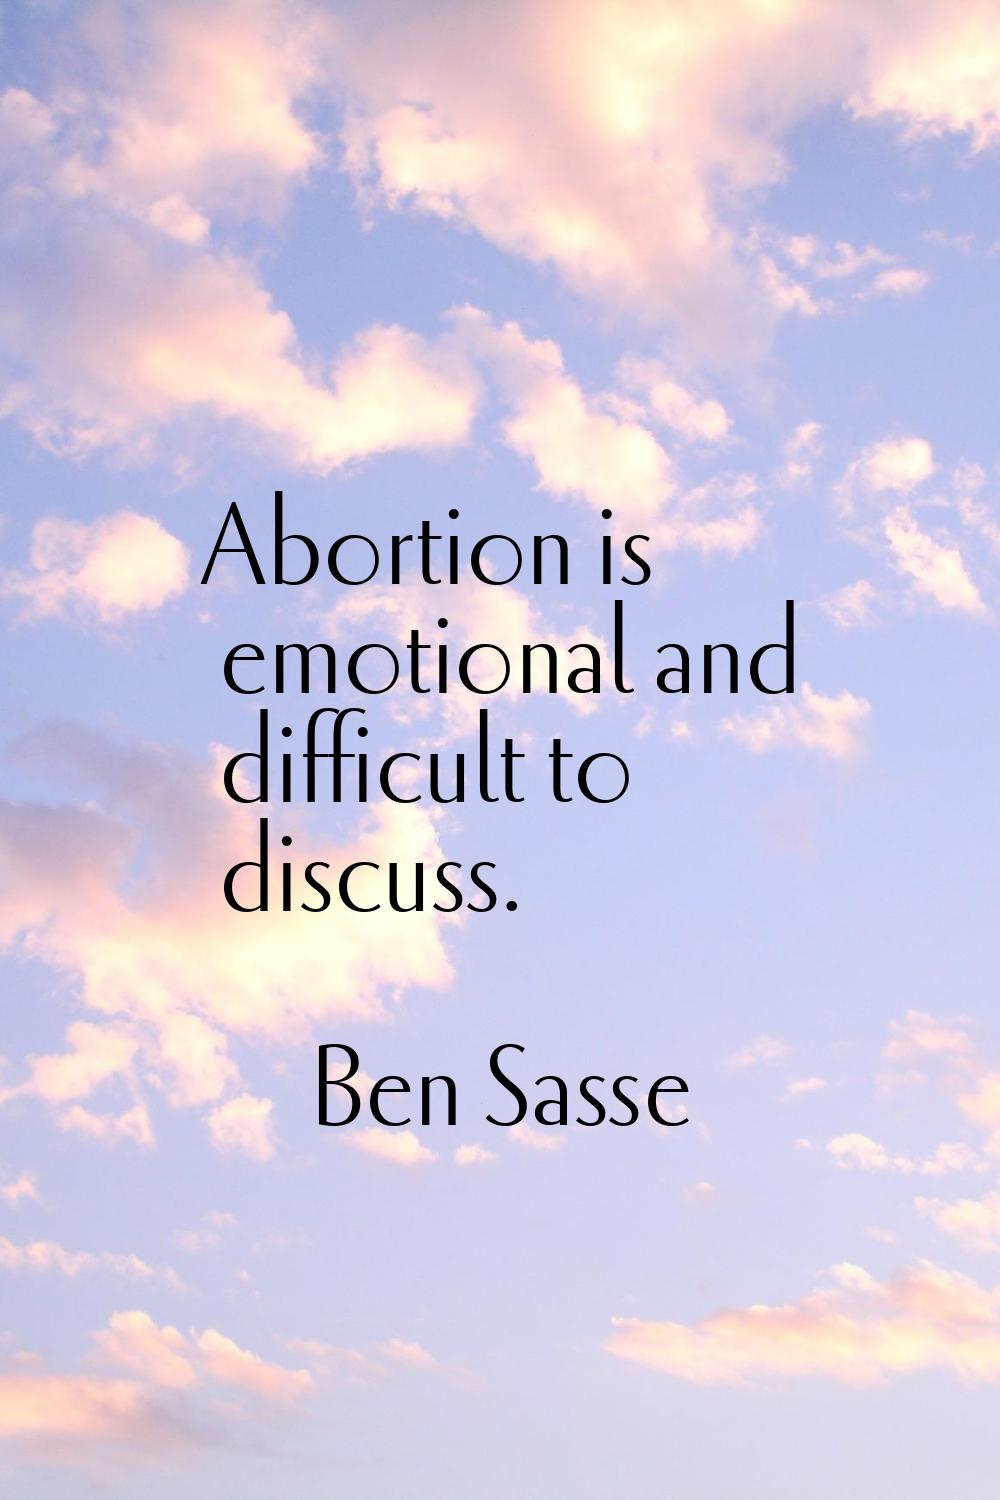 Abortion is emotional and difficult to discuss.